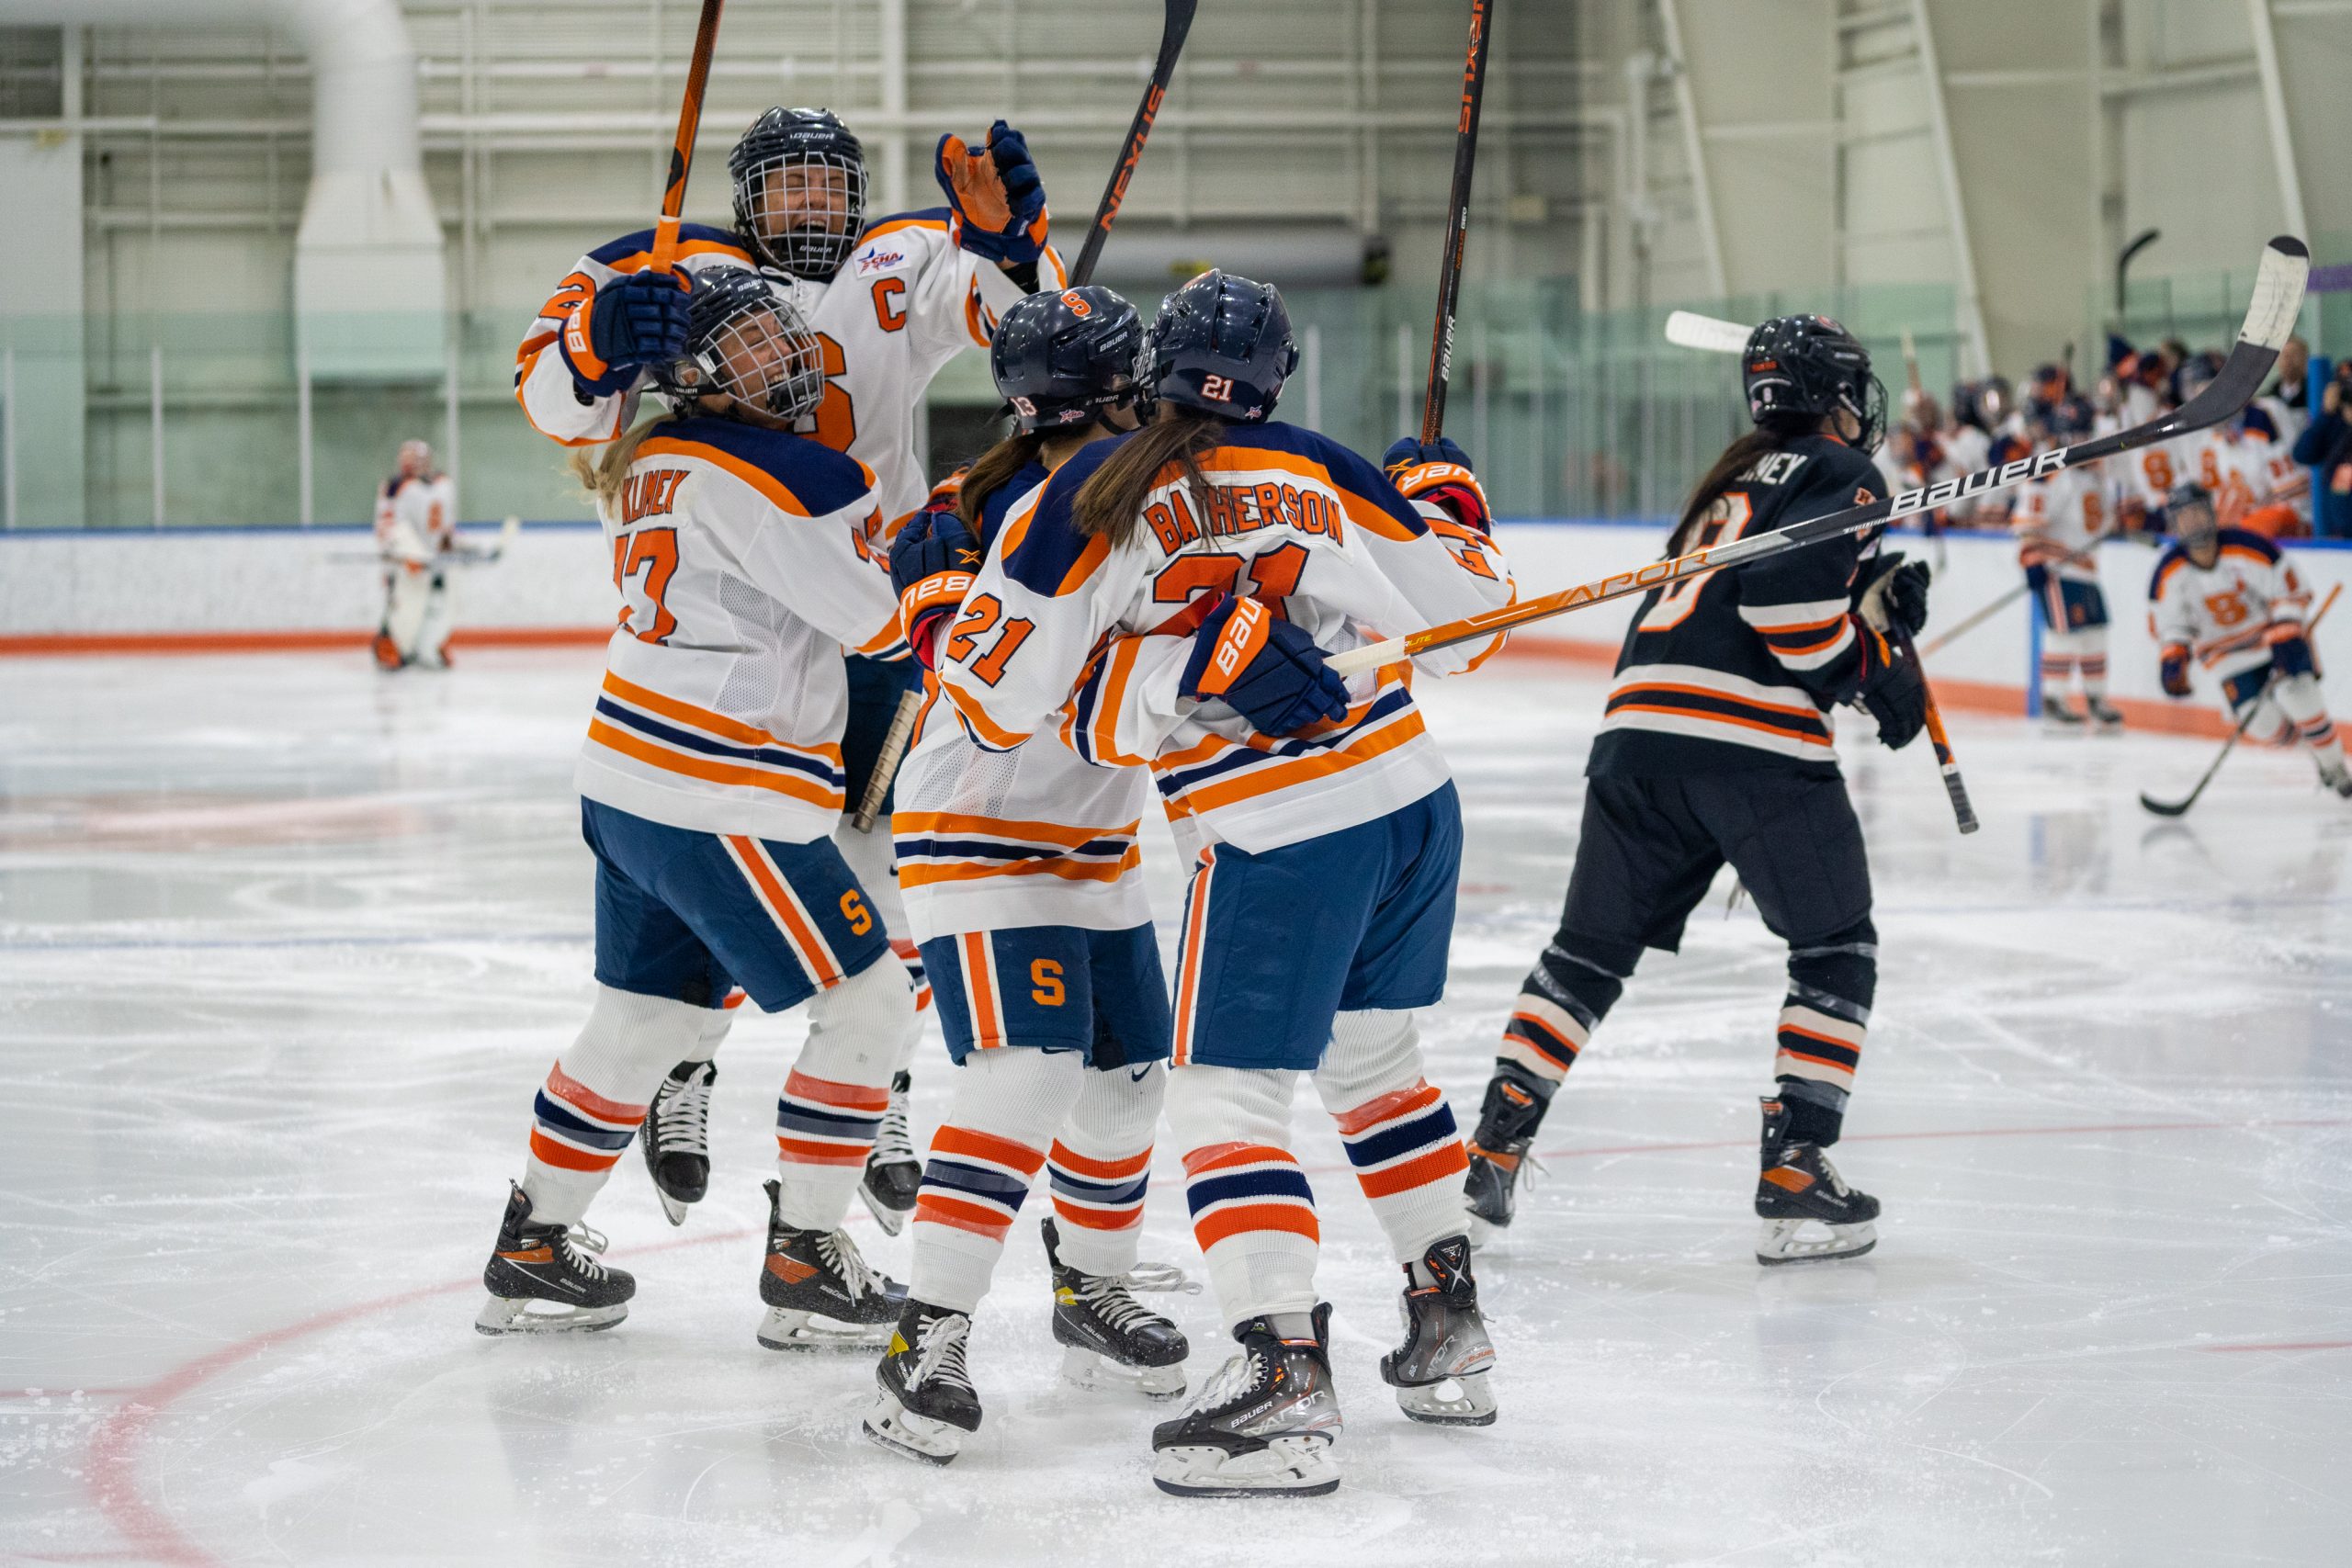 The Syracuse women's hockey team celebrates after winning in overtime against RIT during the CHA hockey semifinals Friday at Tennity Ice Pavilion.